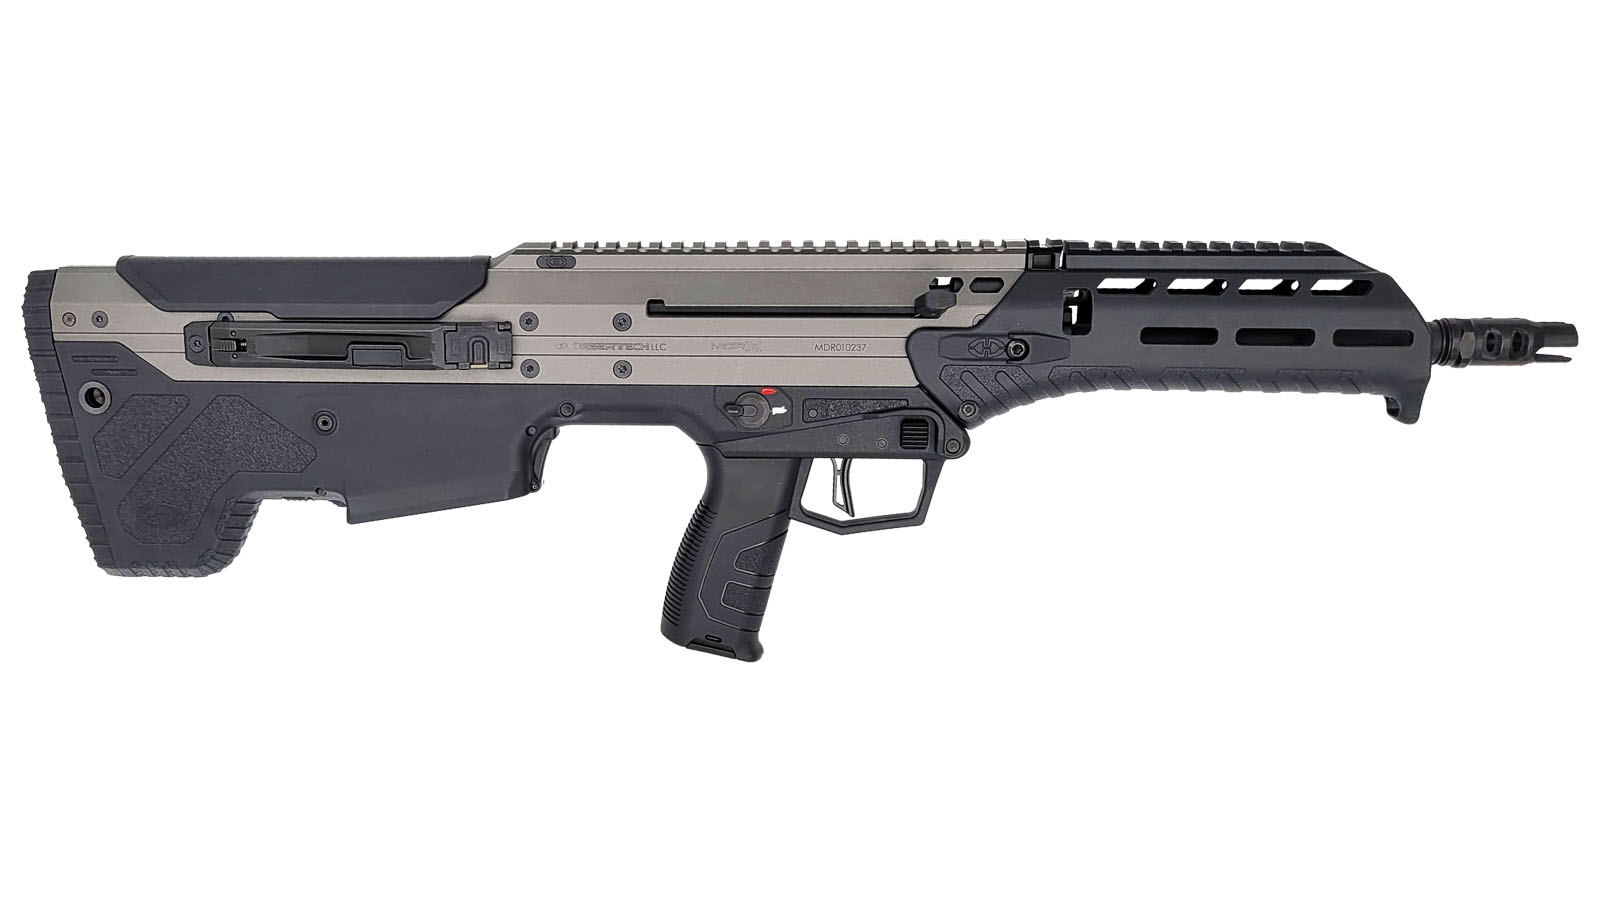 MDRx Rifle, 762NATO 308Win 16" 10rd Forward-Ejection Tungsten